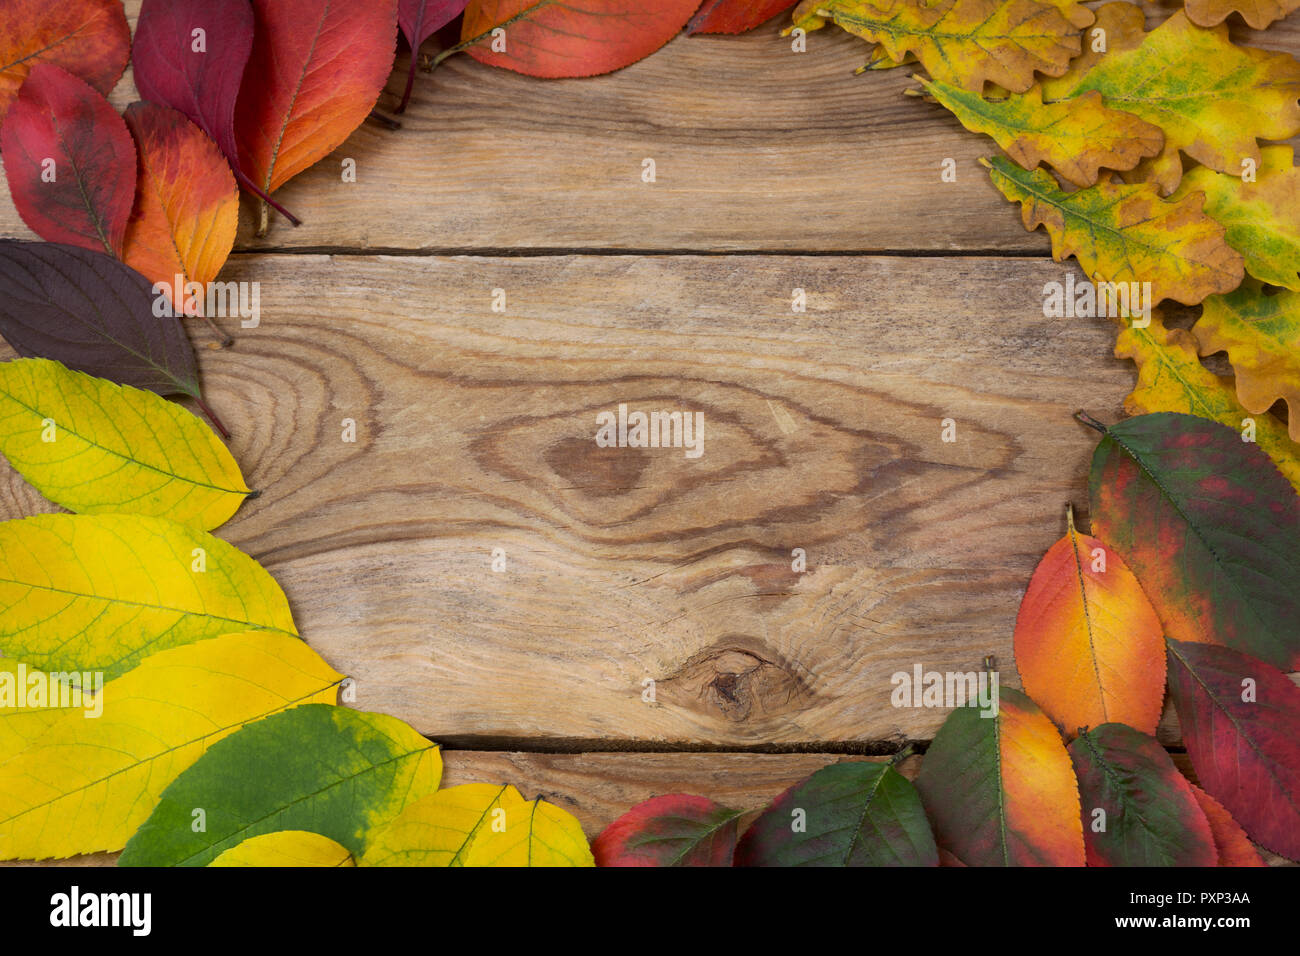 Thanksgiving red, yellow, orange fall leaf wreath frame on the wooden rustic background, copy space Stock Photo